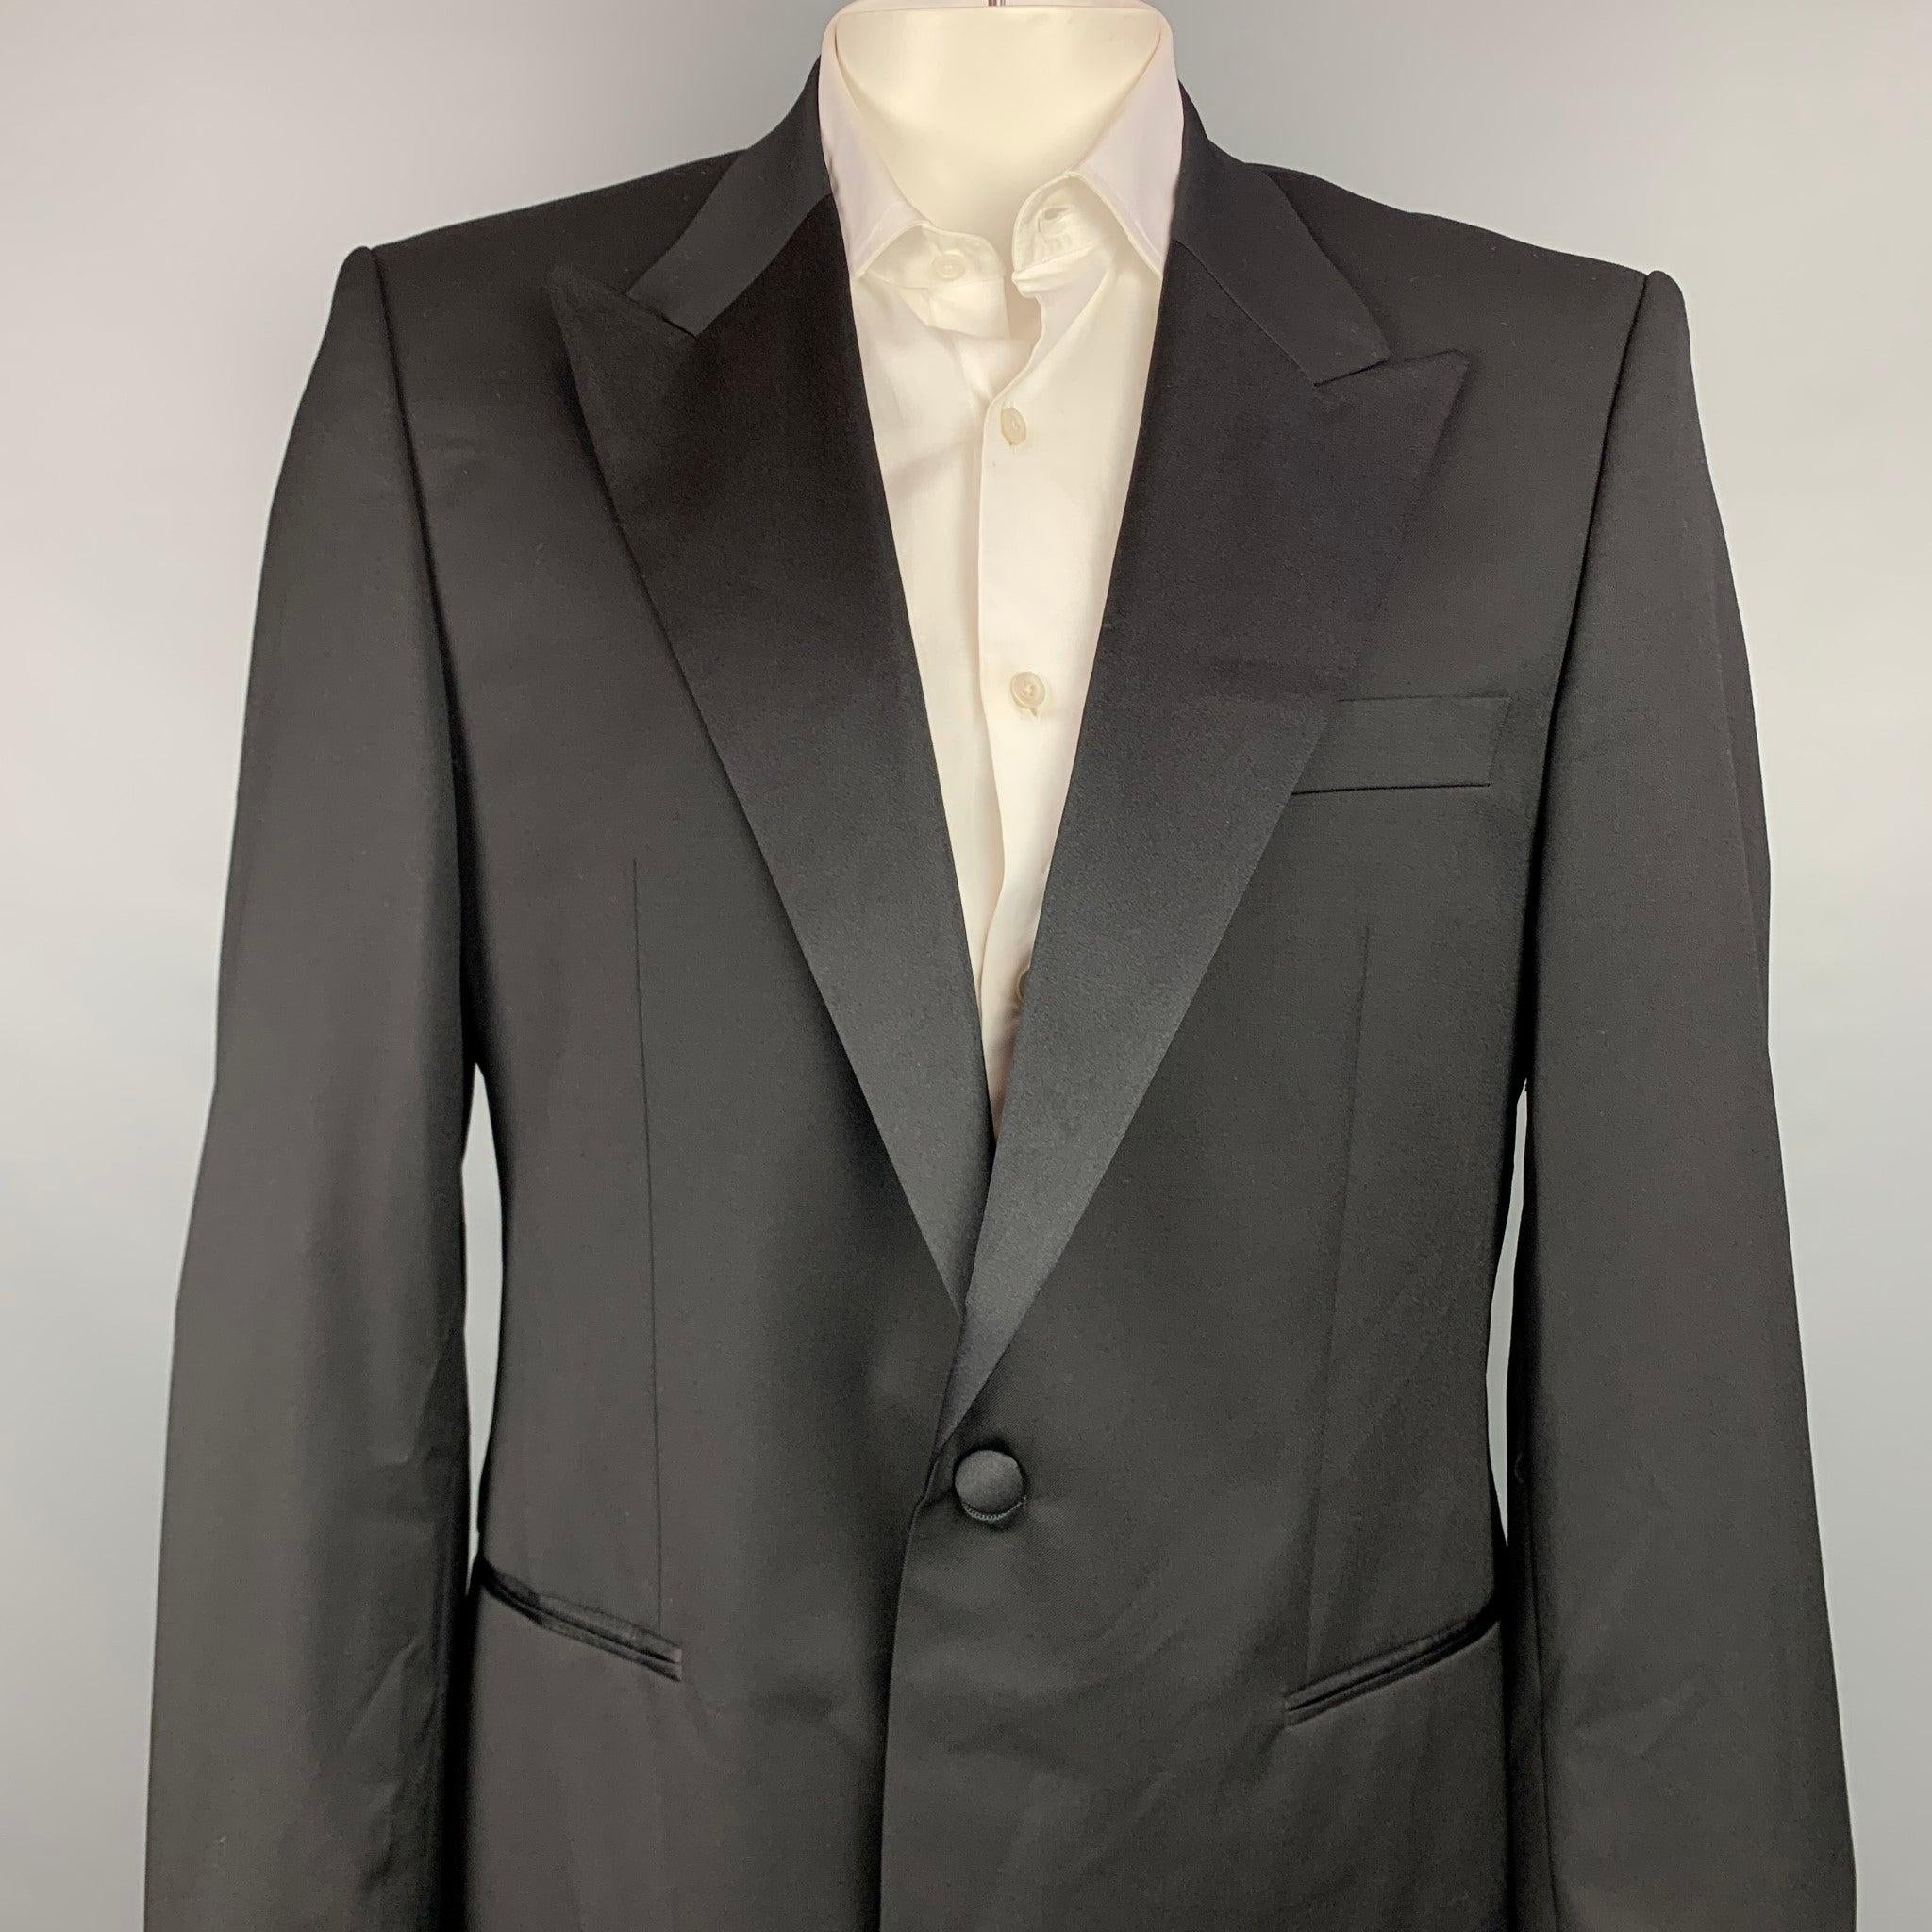 HUGO BOSS sport coat comes in a black wool with a full liner featuring a peak lapel, slit pockets, and a single button closure. Made in Bulgaria.New With Tags.
 

Marked:   US 44 R 

Measurements: 
 
Shoulder: 19 inches  Chest: 44 inches  Sleeve: